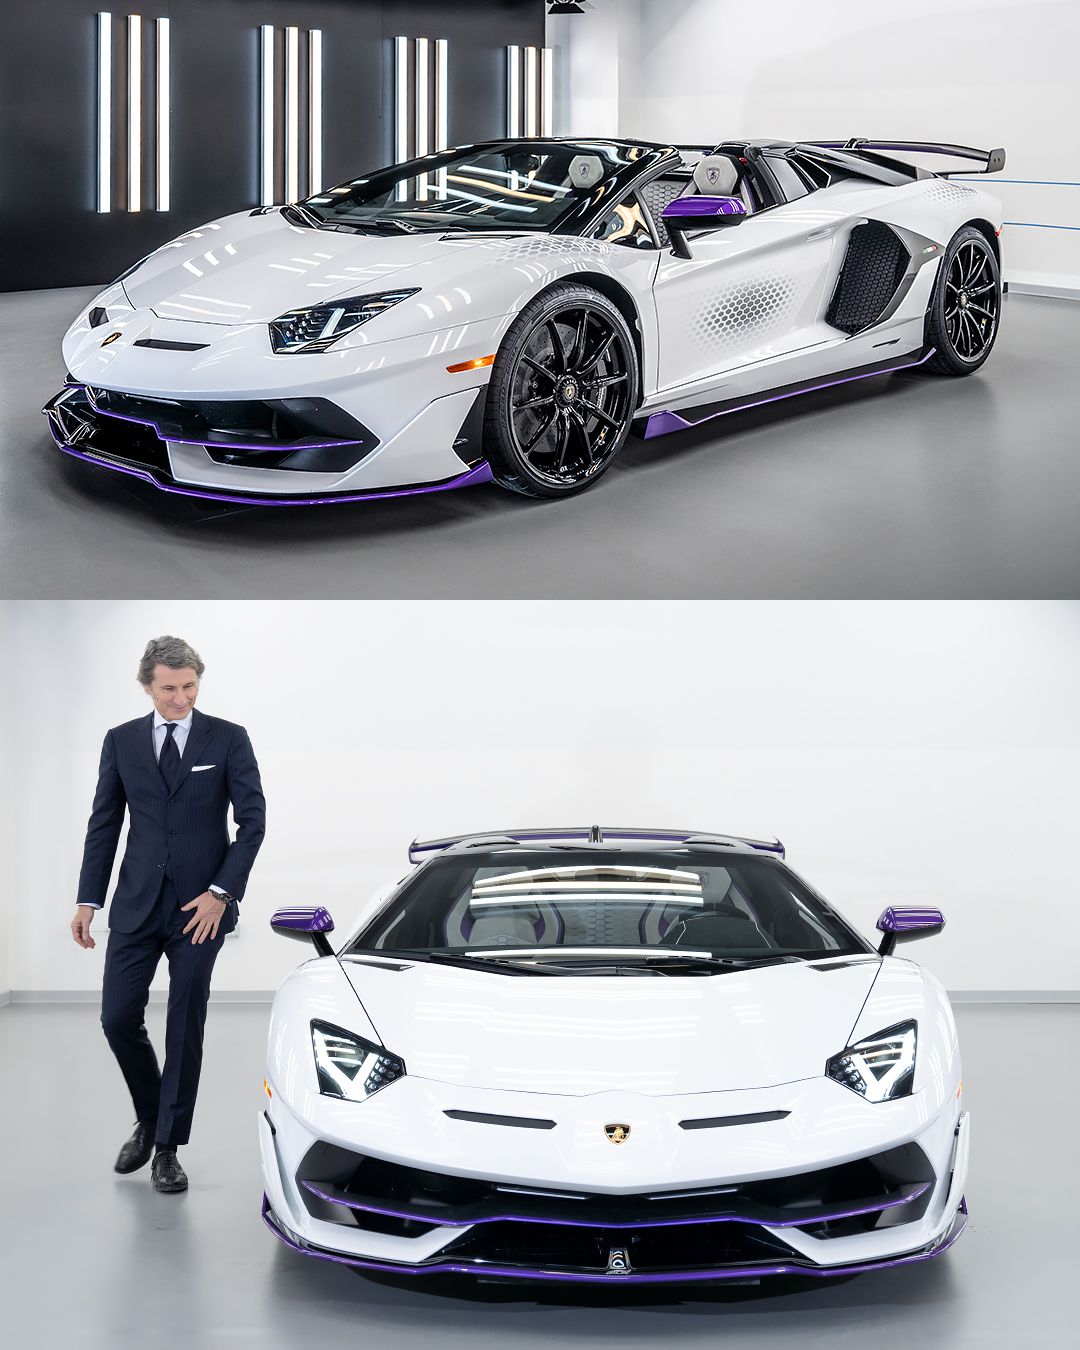 50% of Lamborghini Cars Off the Production Line Have Ad Personam Features